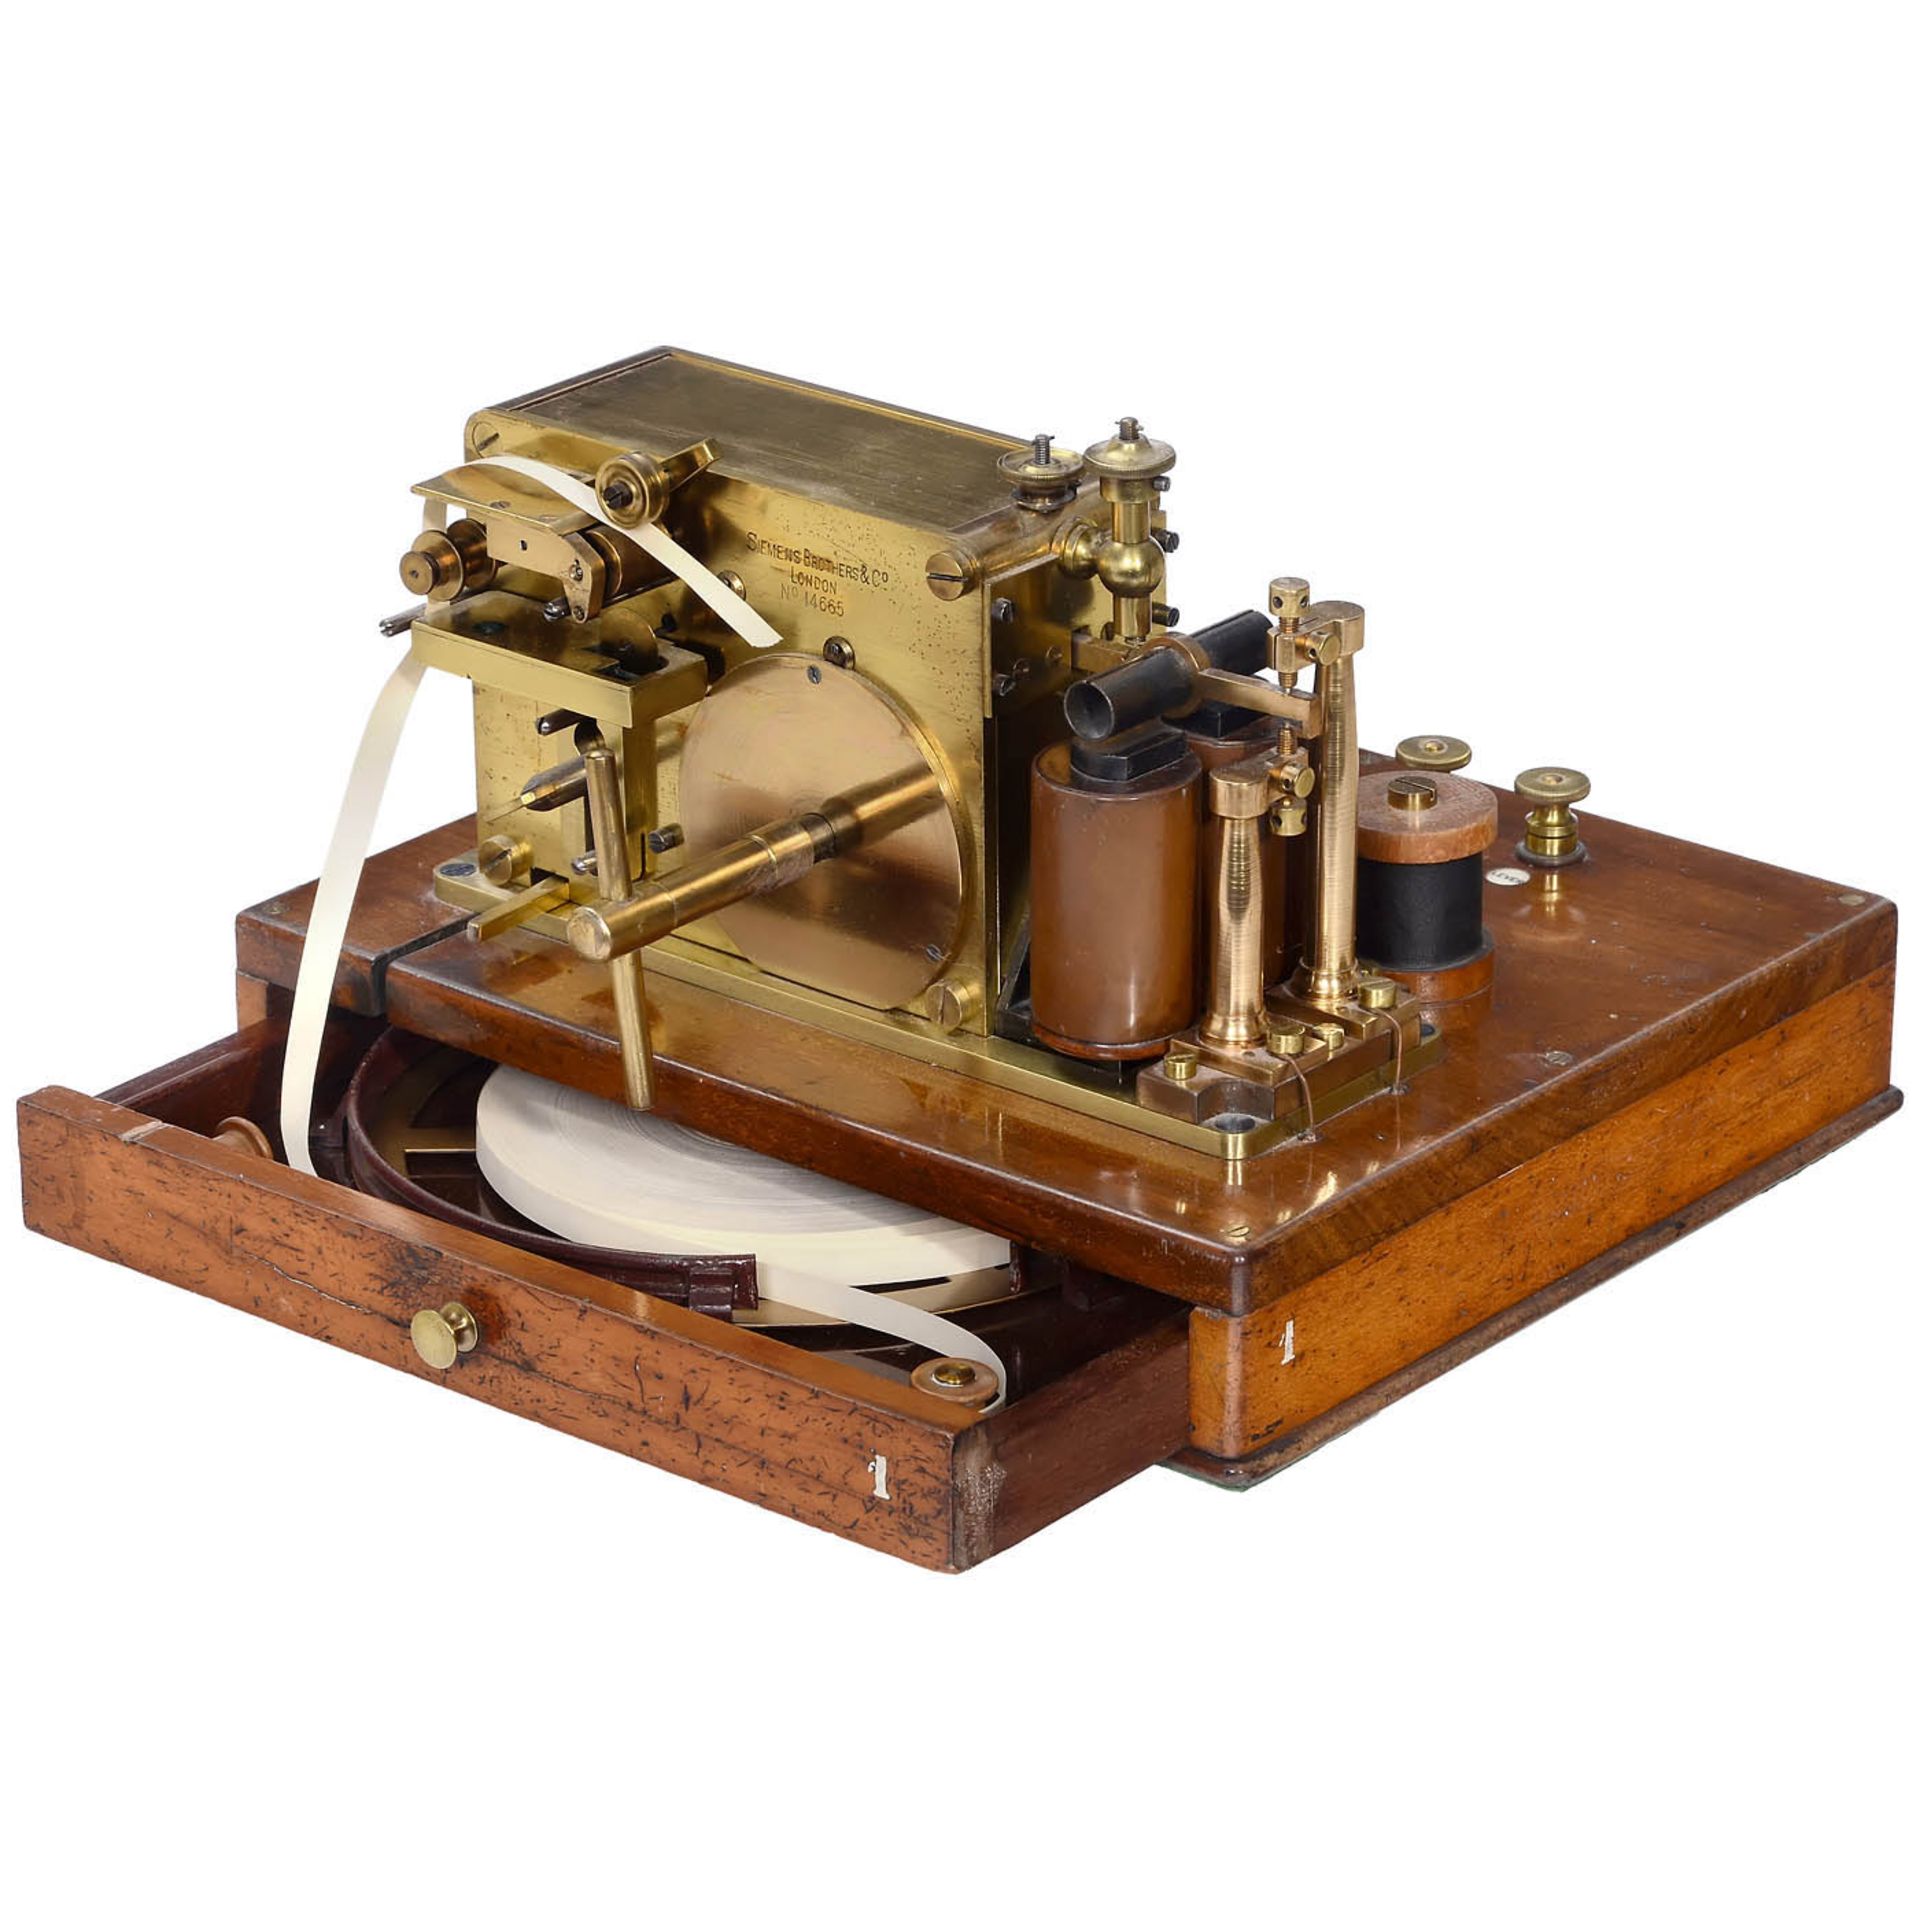 Morse Telegraph Recorder by Siemens Brothers & Co, London c. 1870 - Image 2 of 2